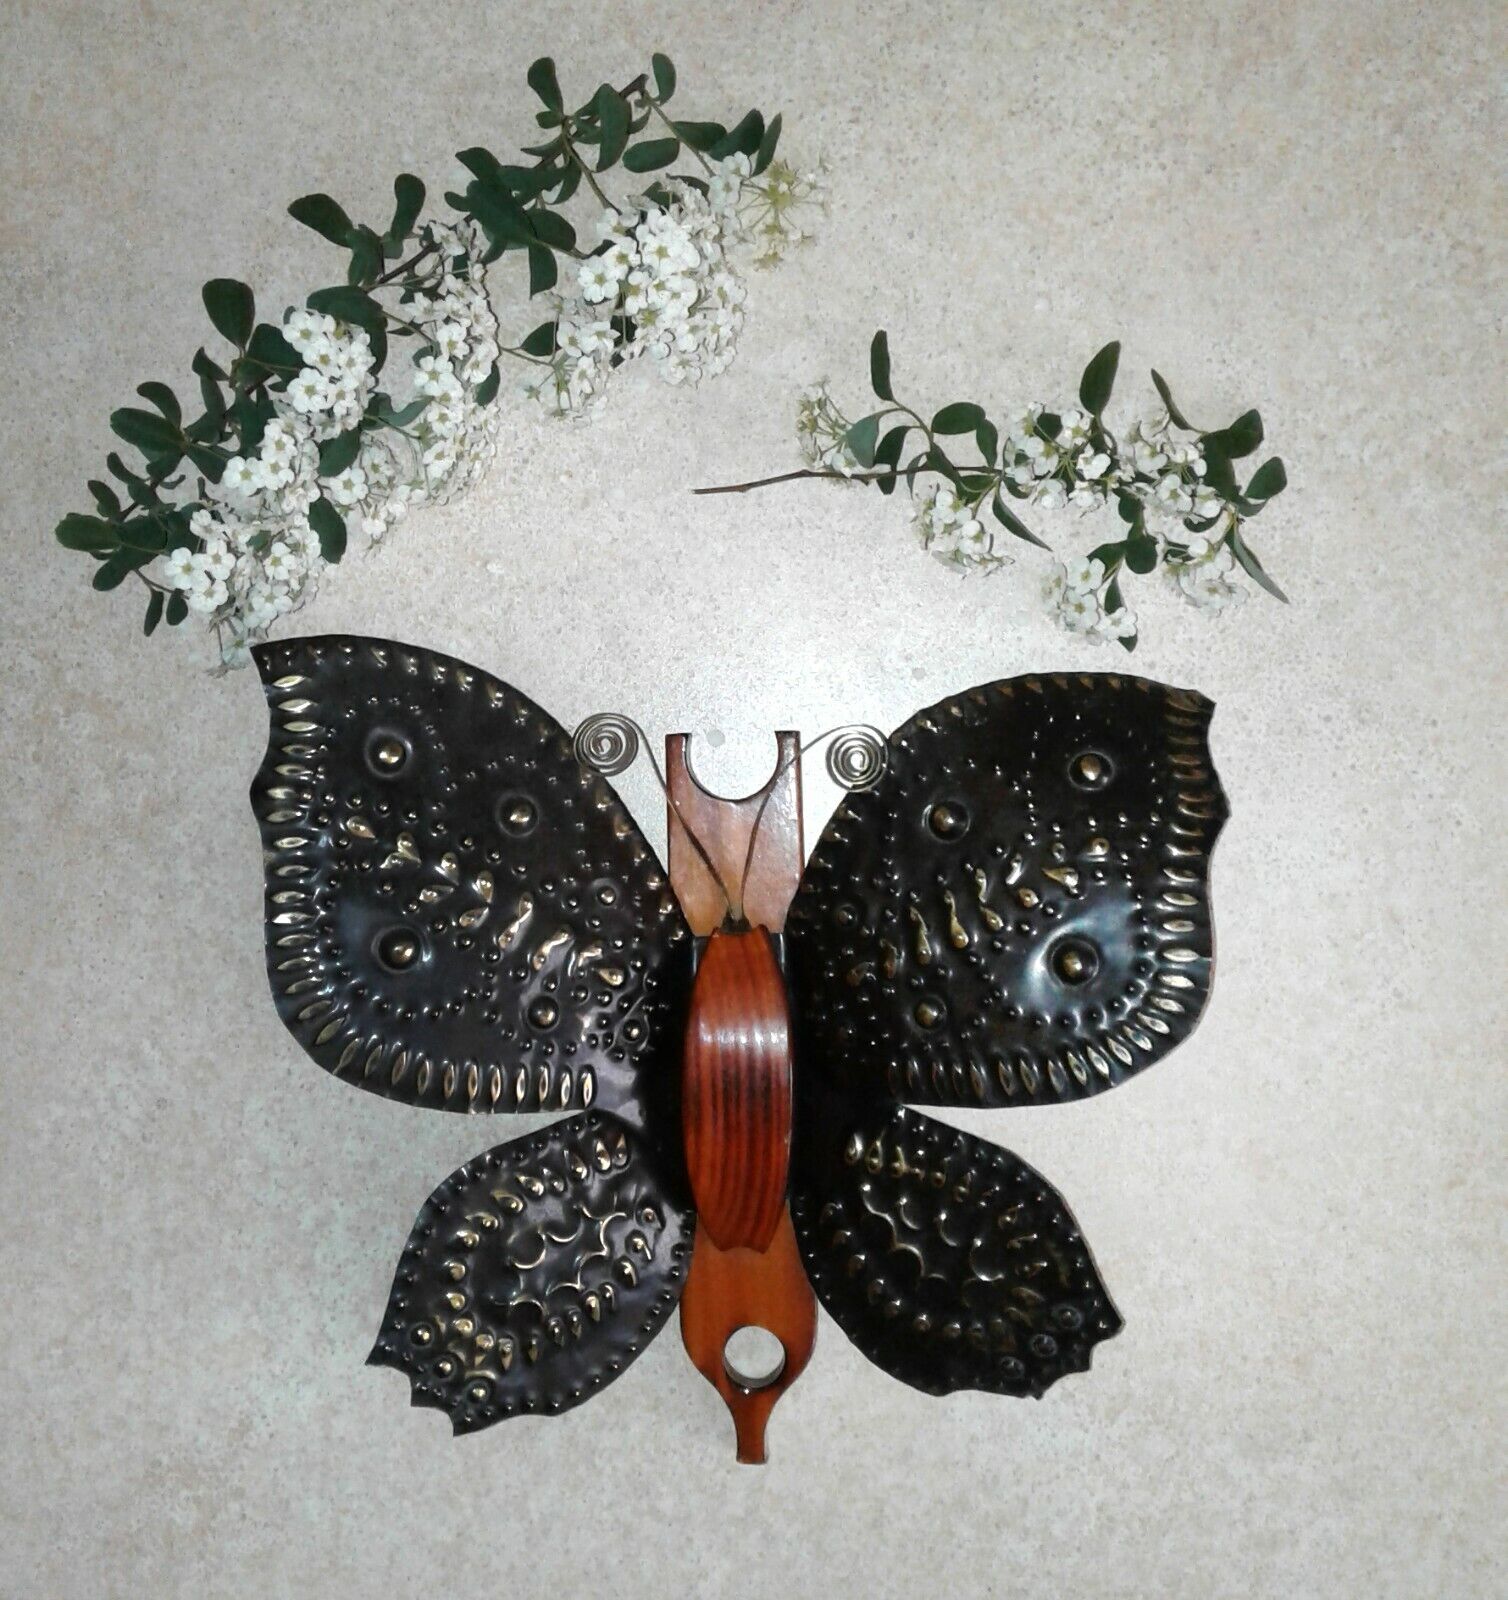 Vintage Butterfly Wall Hanging Copper Wood Metal Art Wall Decor